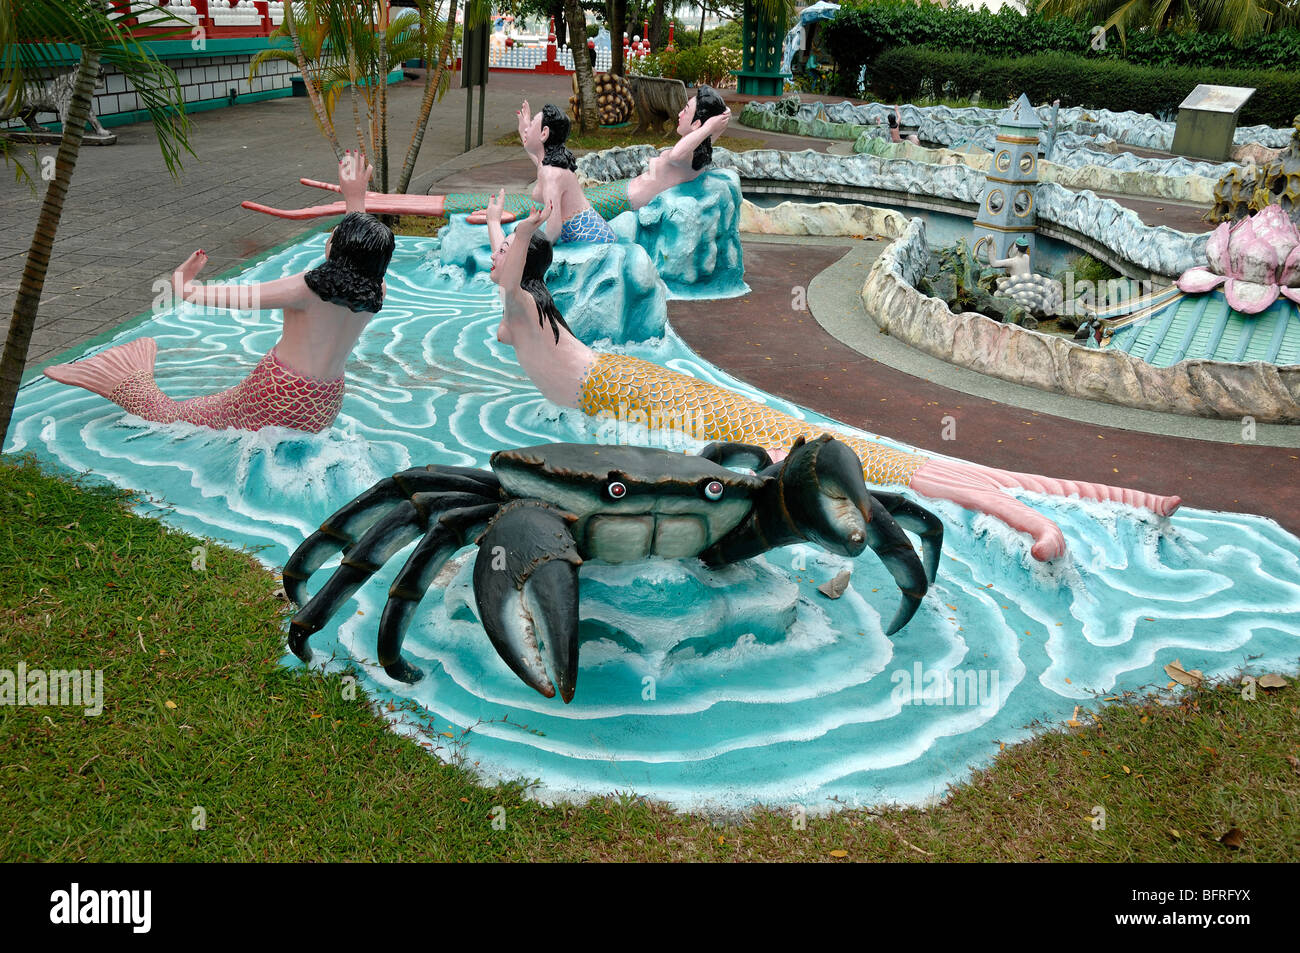 Giant Crab and Mermaids or Mermaid Satues in the Signature Pond, Tiger Balm Gardens Chinese Theme Park, Singapore Stock Photo